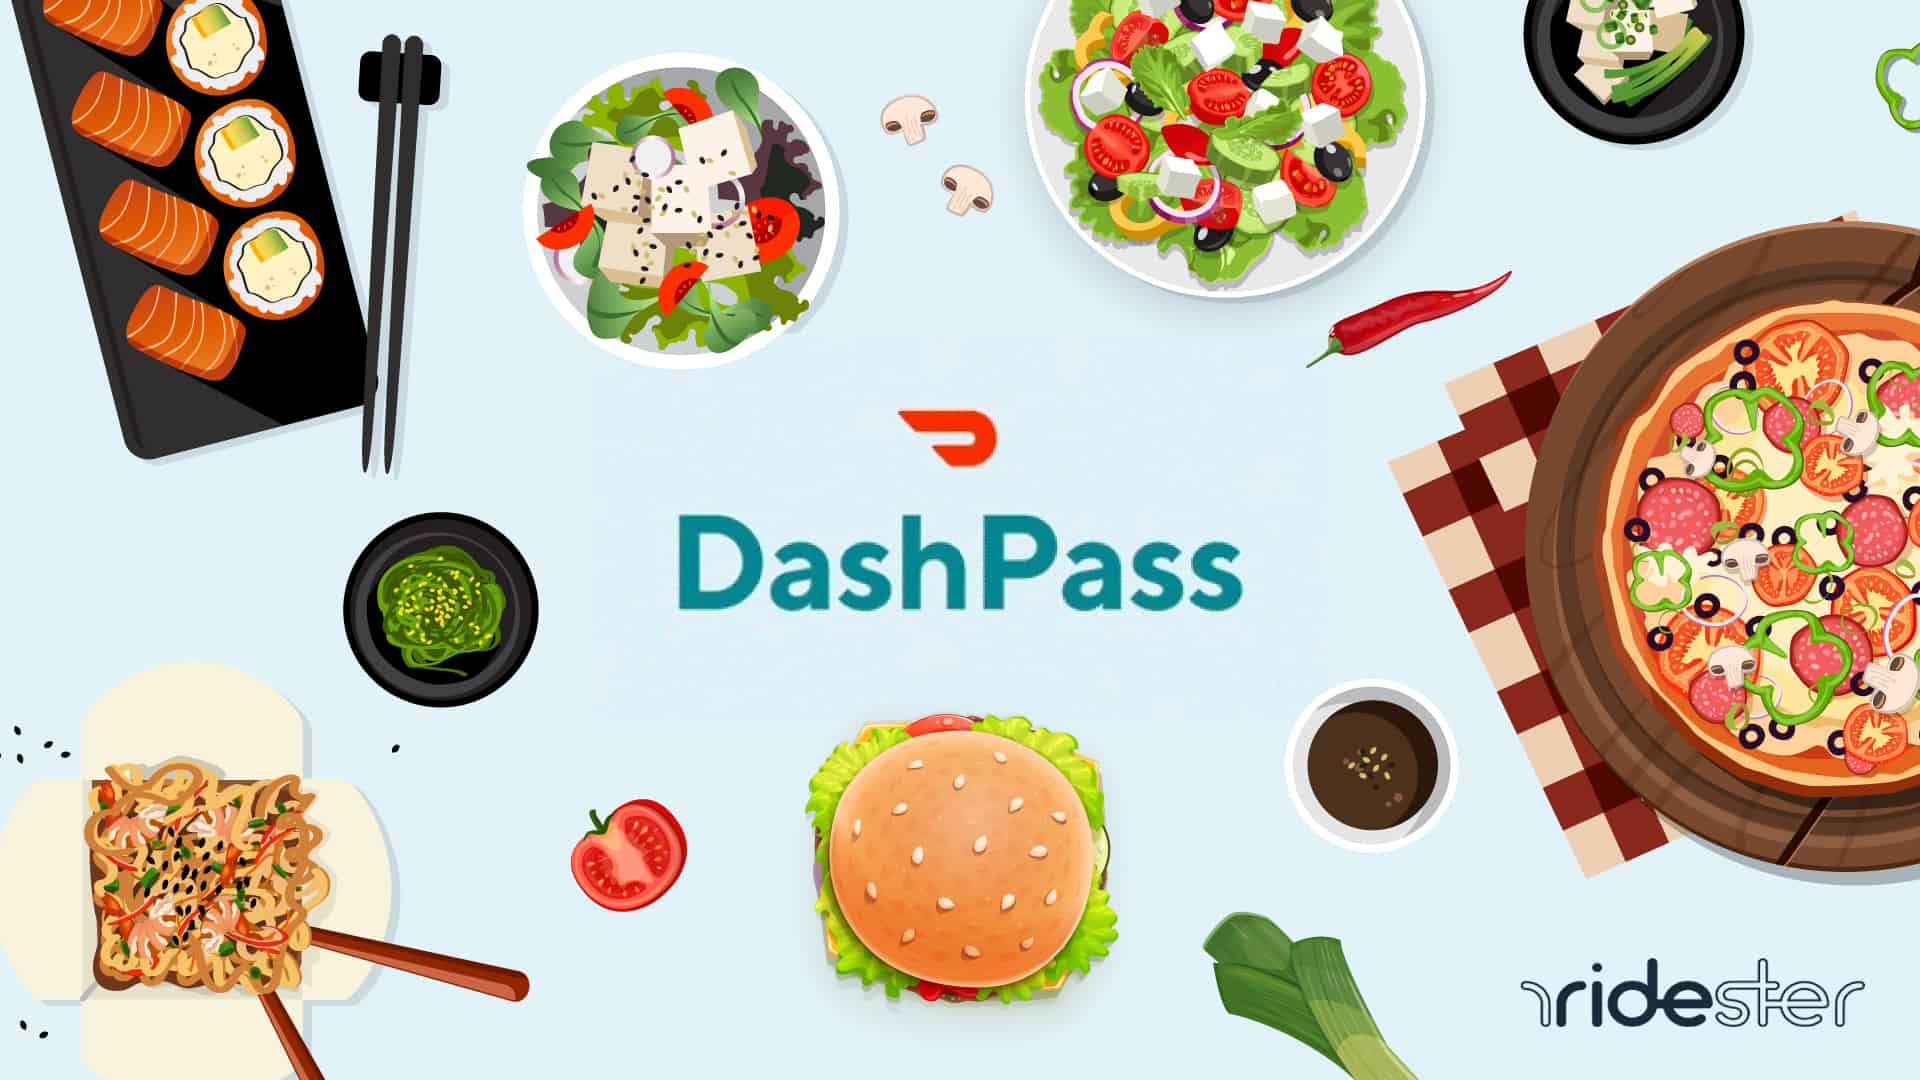 DashPass How It Works, Pricing, Membership Options & More